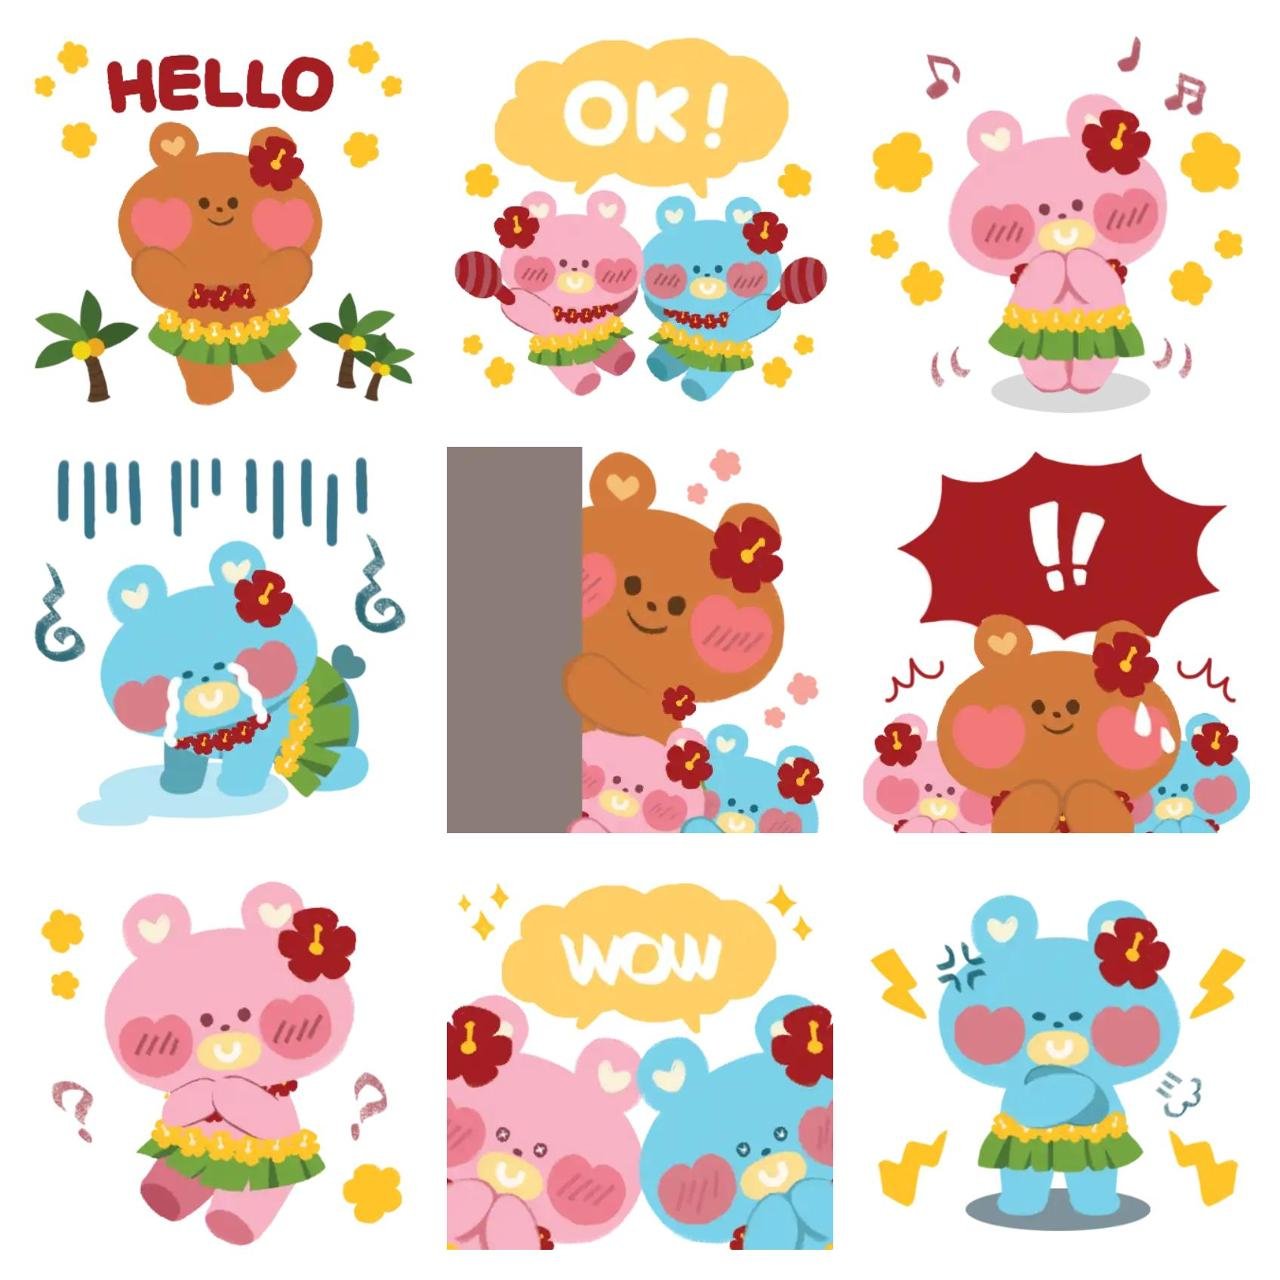 Lovely bear friends Animation/Cartoon,Animals sticker pack for Whatsapp, Telegram, Signal, and others chatting and message apps